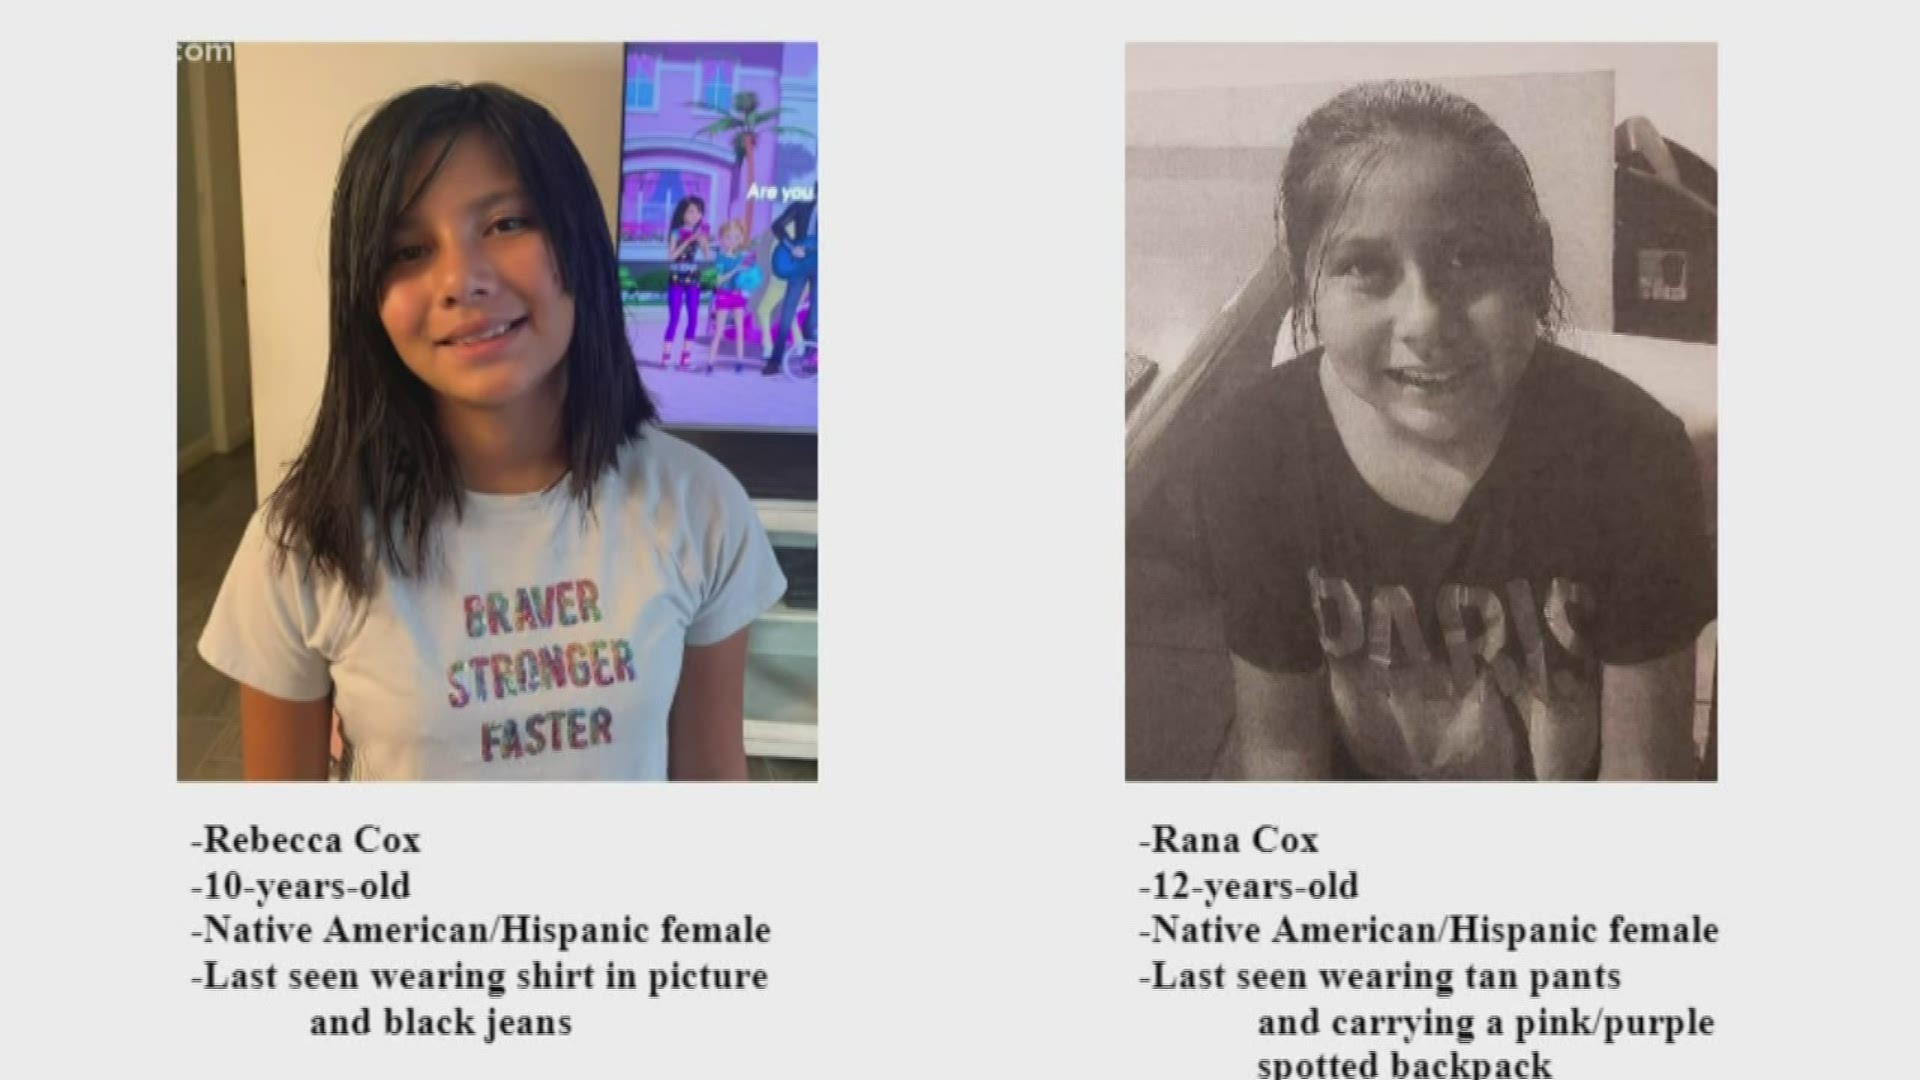 Rebecca and Rana Cox went missing from a home near Verrado Heritage Elementary School. Rebecca is 10 and Rana is 12. Call Buckeye PD if you see them.